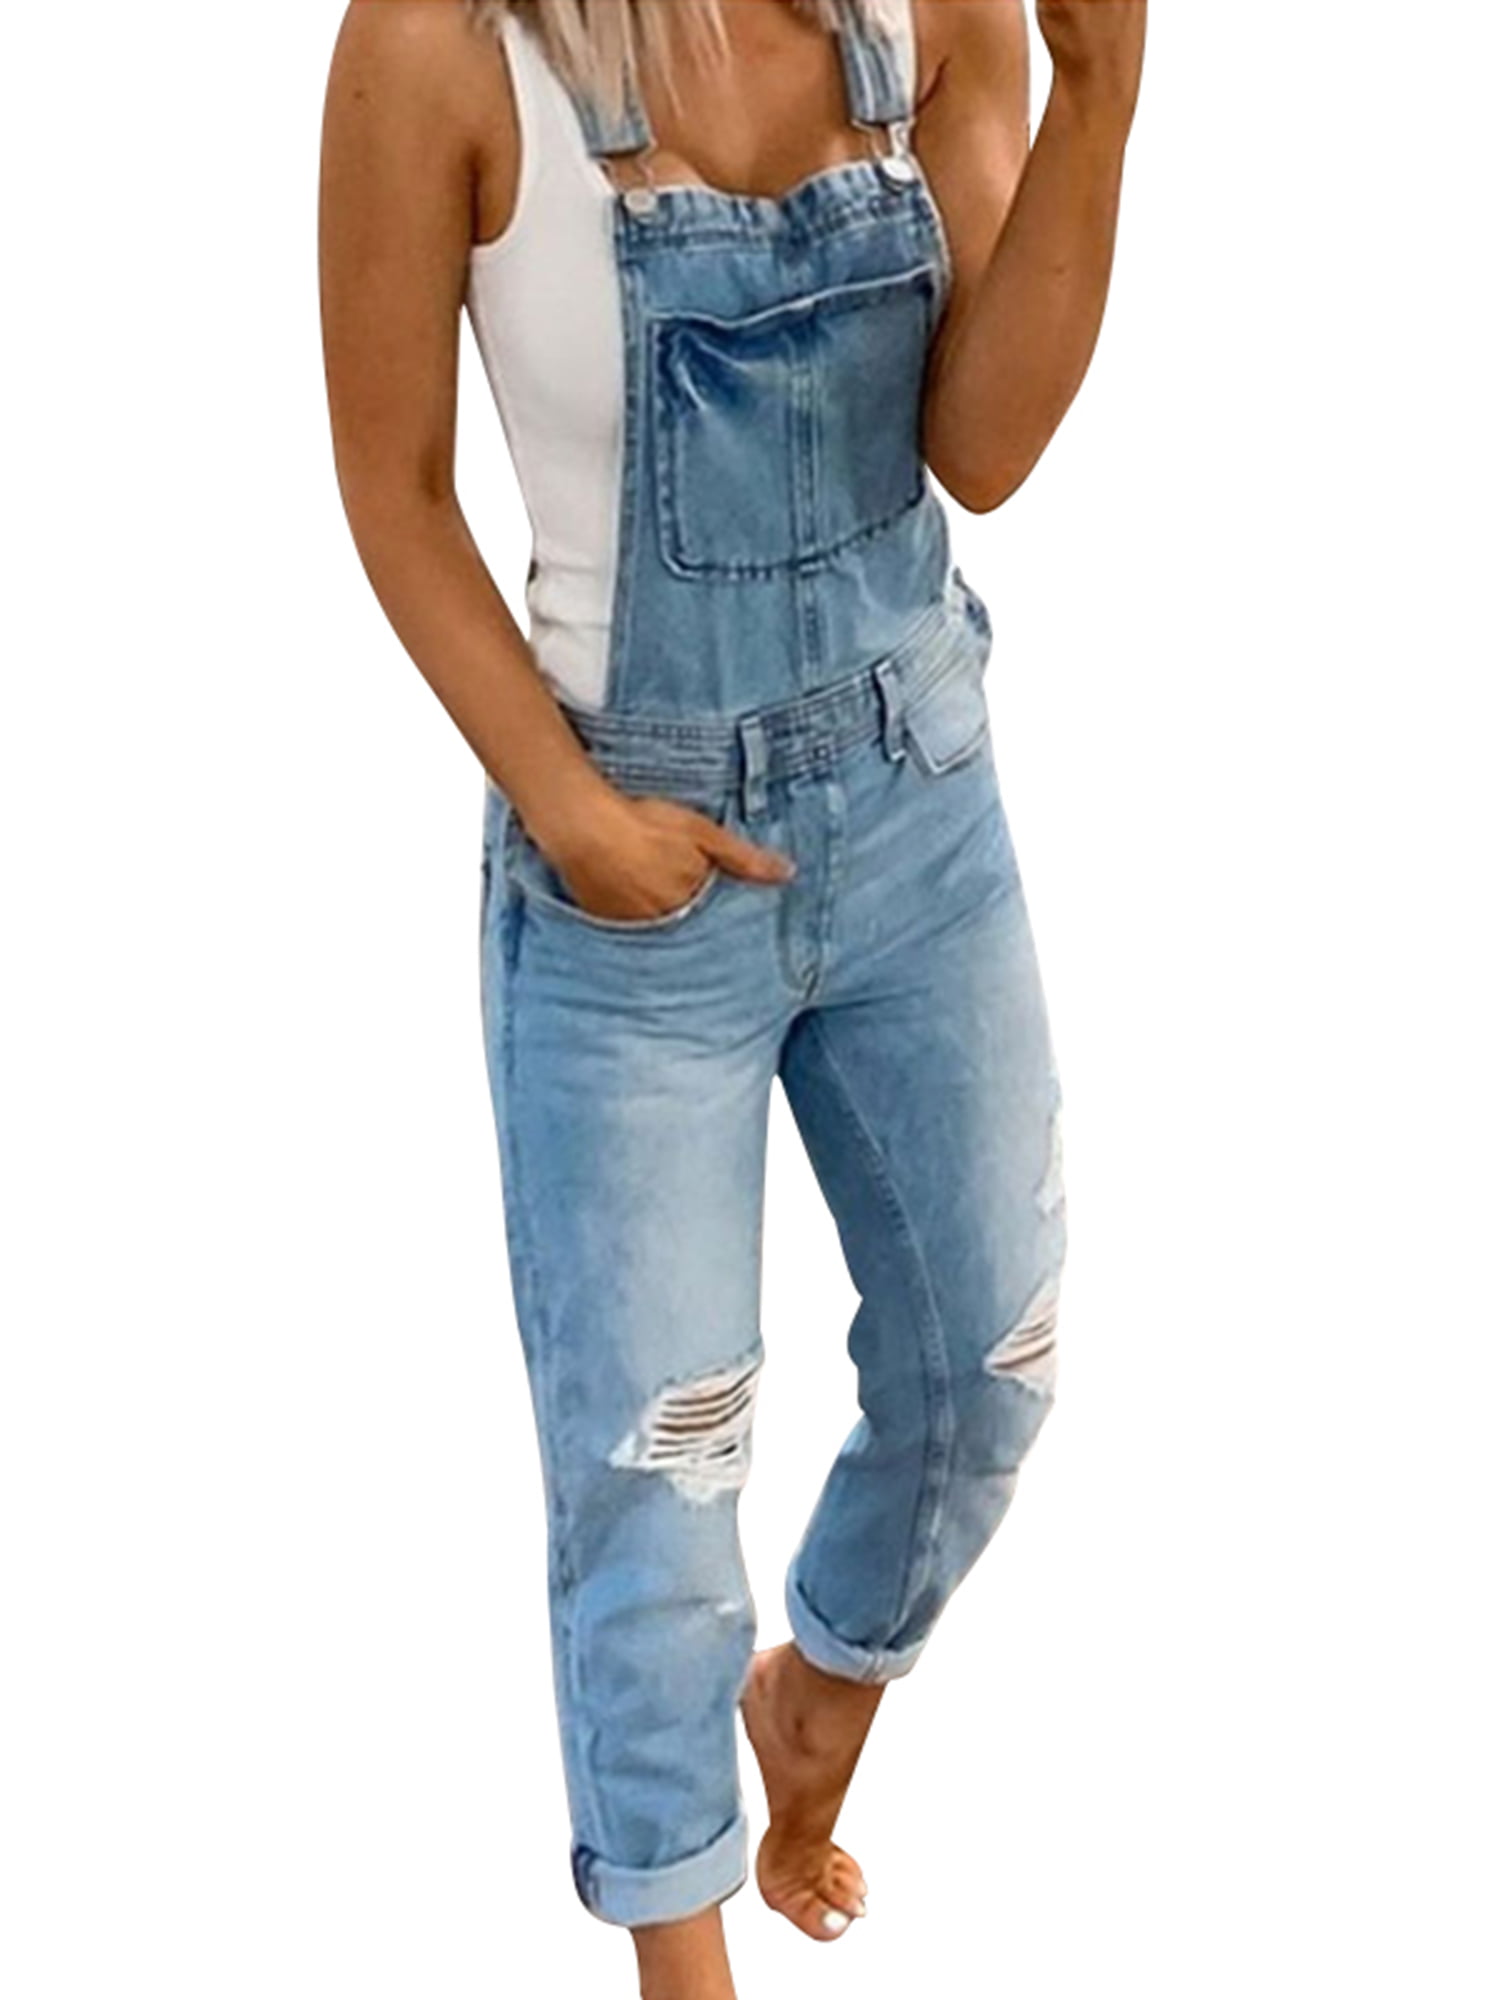 New Women's Ladie's Denim Dungarees Slim Fit Ripped Wash Jeans Jumpsuit 8 TO 18 